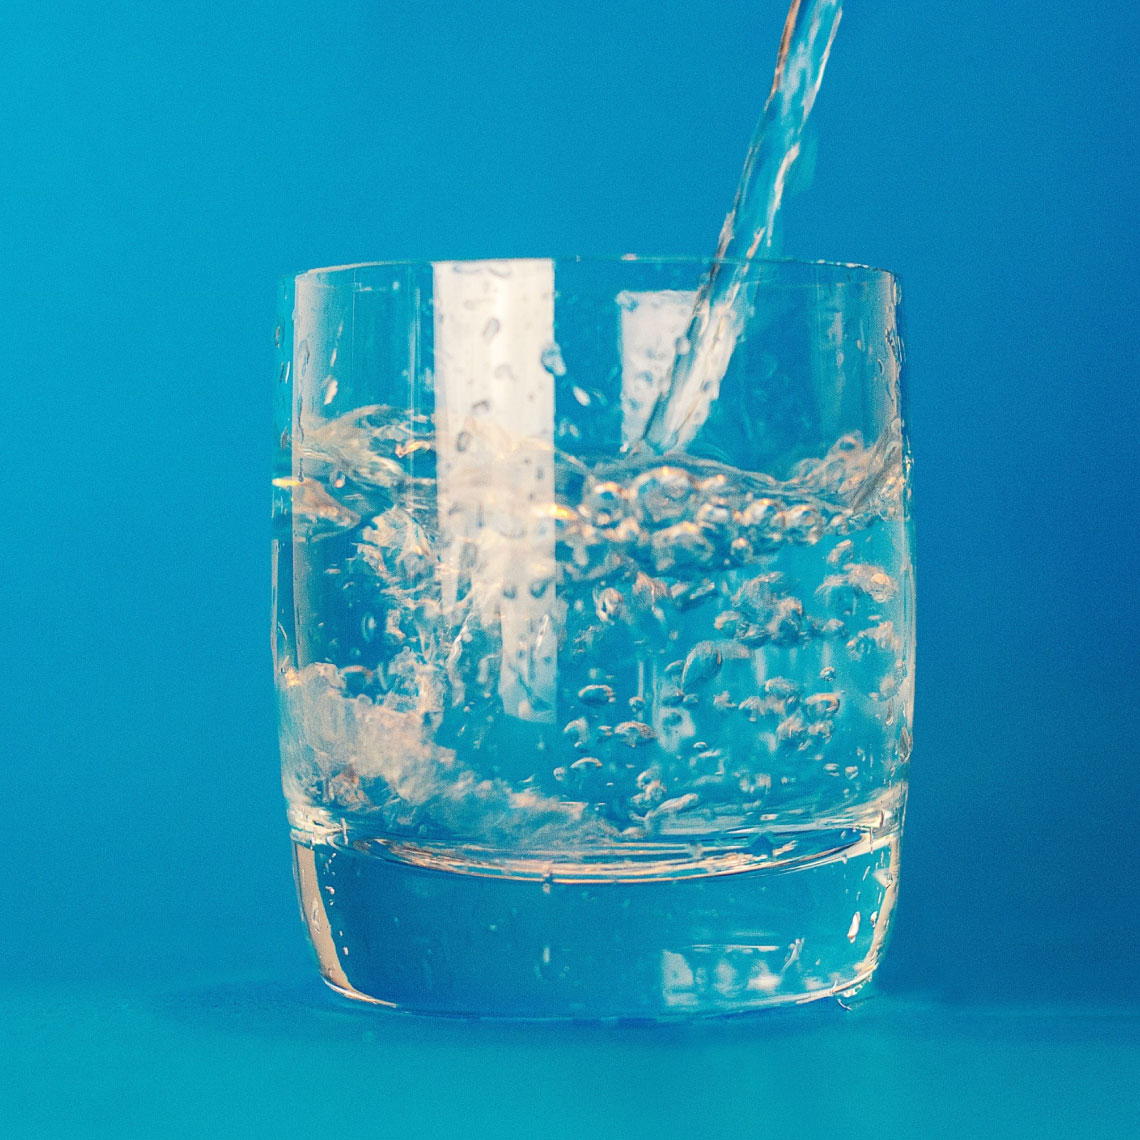 small-drinking-water-suppliers-aqualinc-research-nz